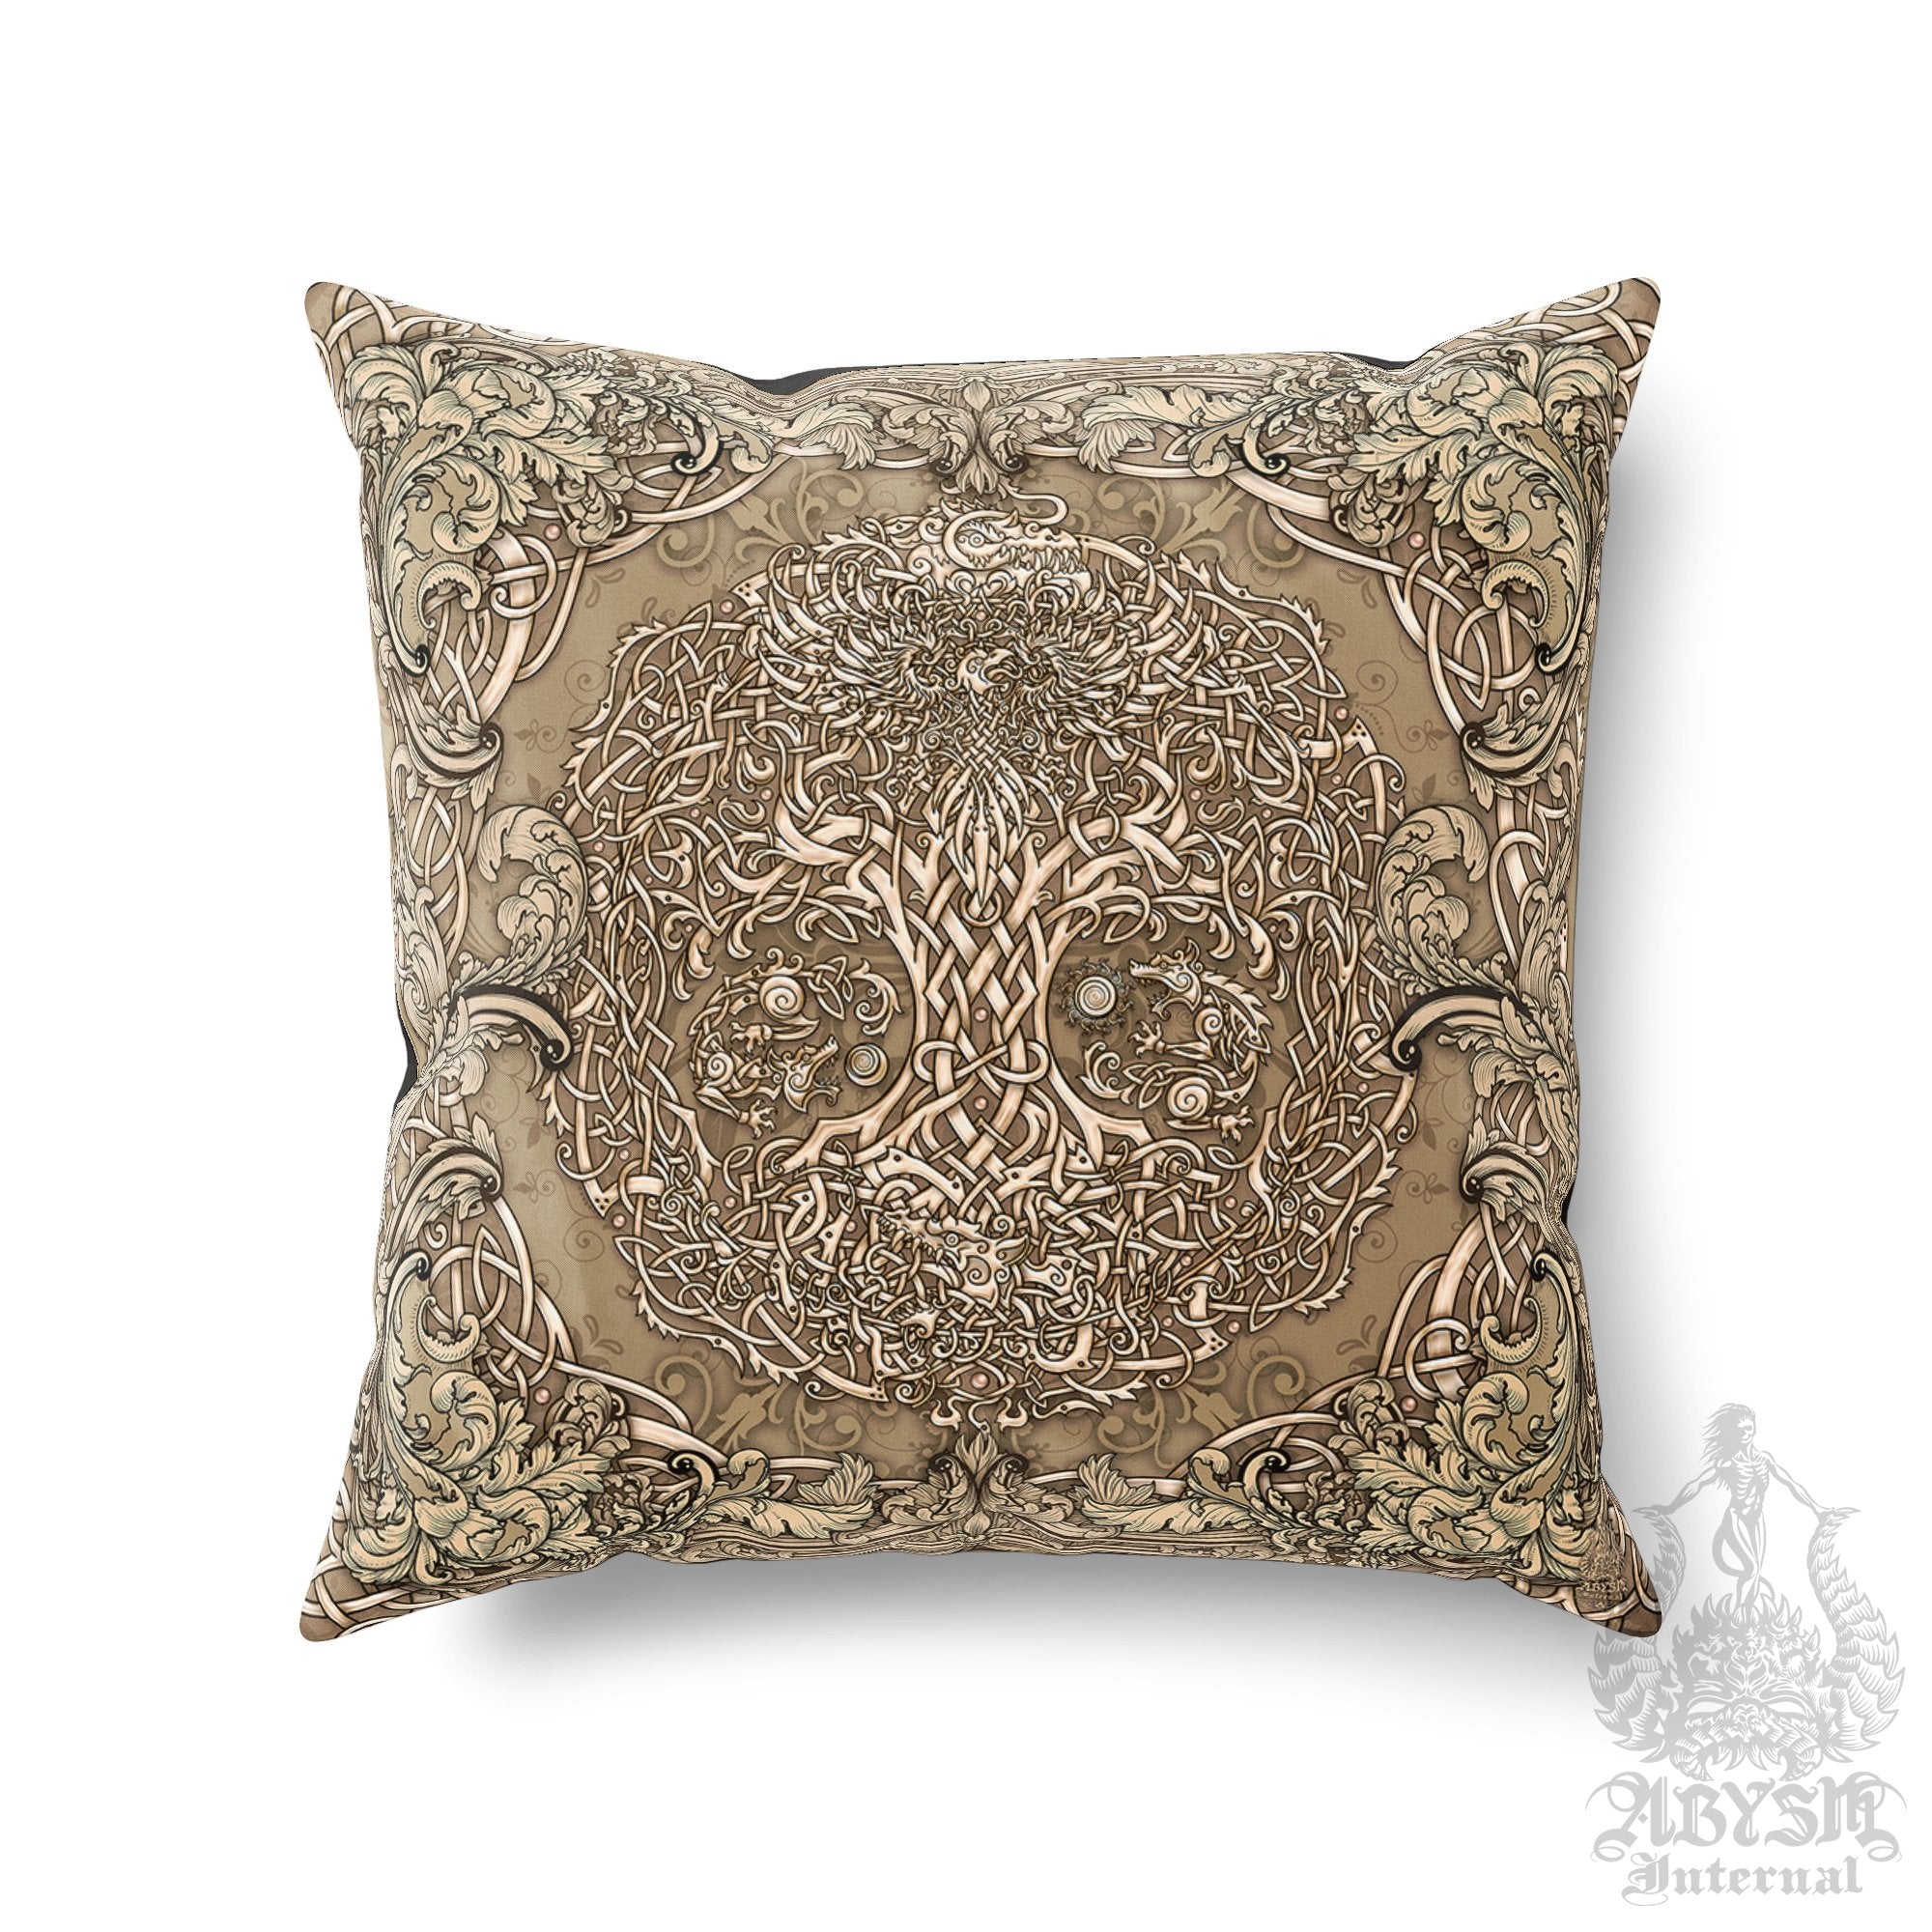 Viking Throw Pillow, Decorative Accent Cushion, Yggdrasil, Norse Decor, Nordic Art, Alternative, Funky and Eclectic Home - Tree of Life, Cream - Abysm Internal